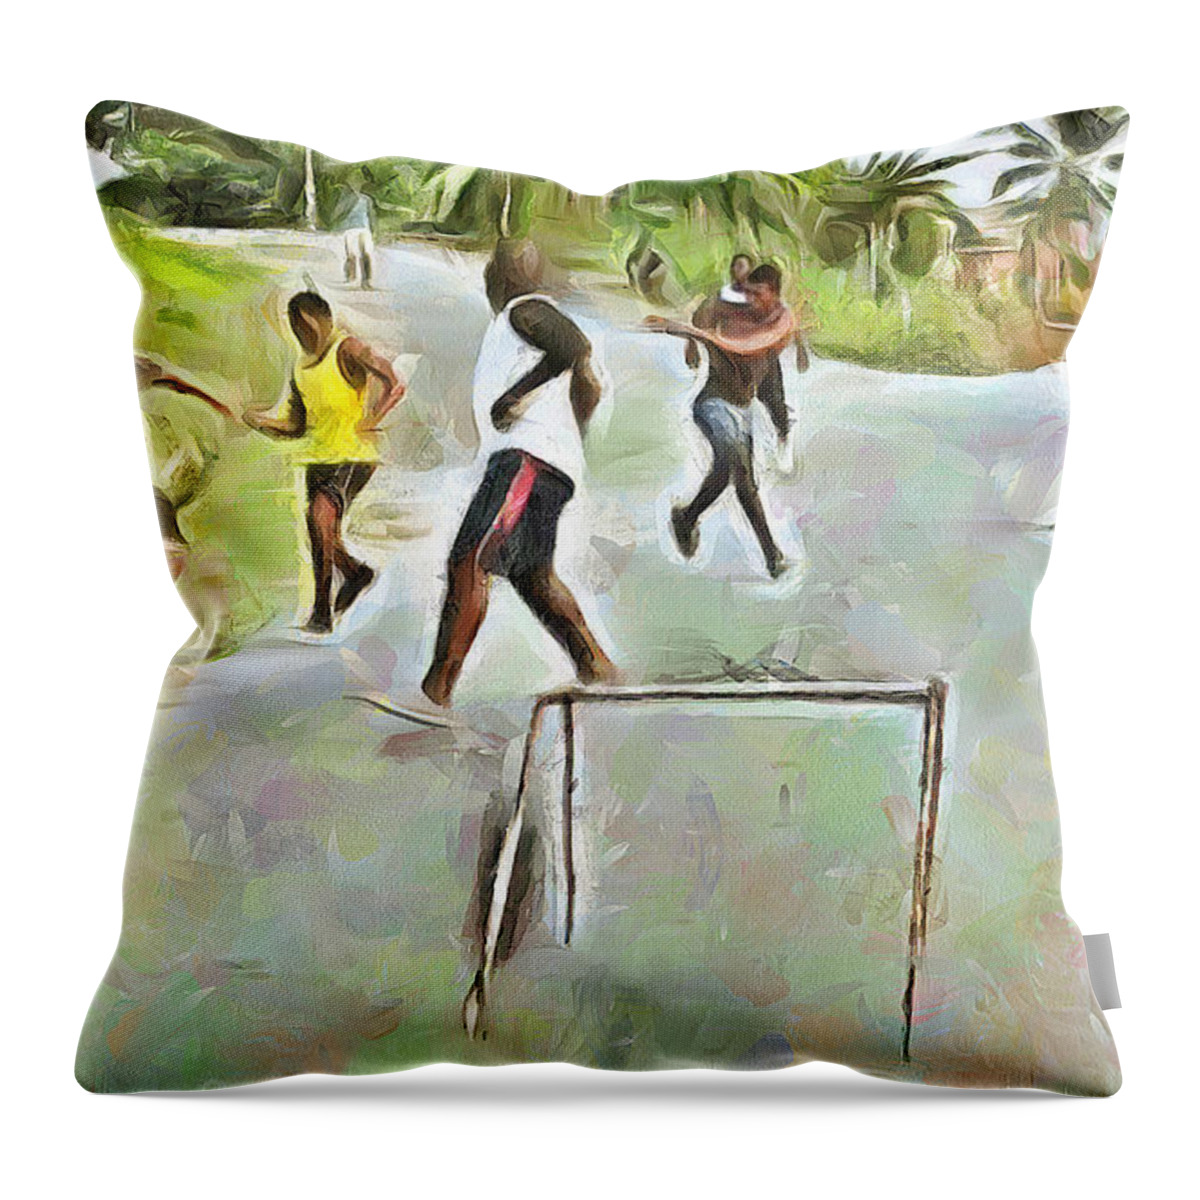 Small Goal Throw Pillow featuring the painting Caribbean Scenes - Small Goal In De Street by Wayne Pascall